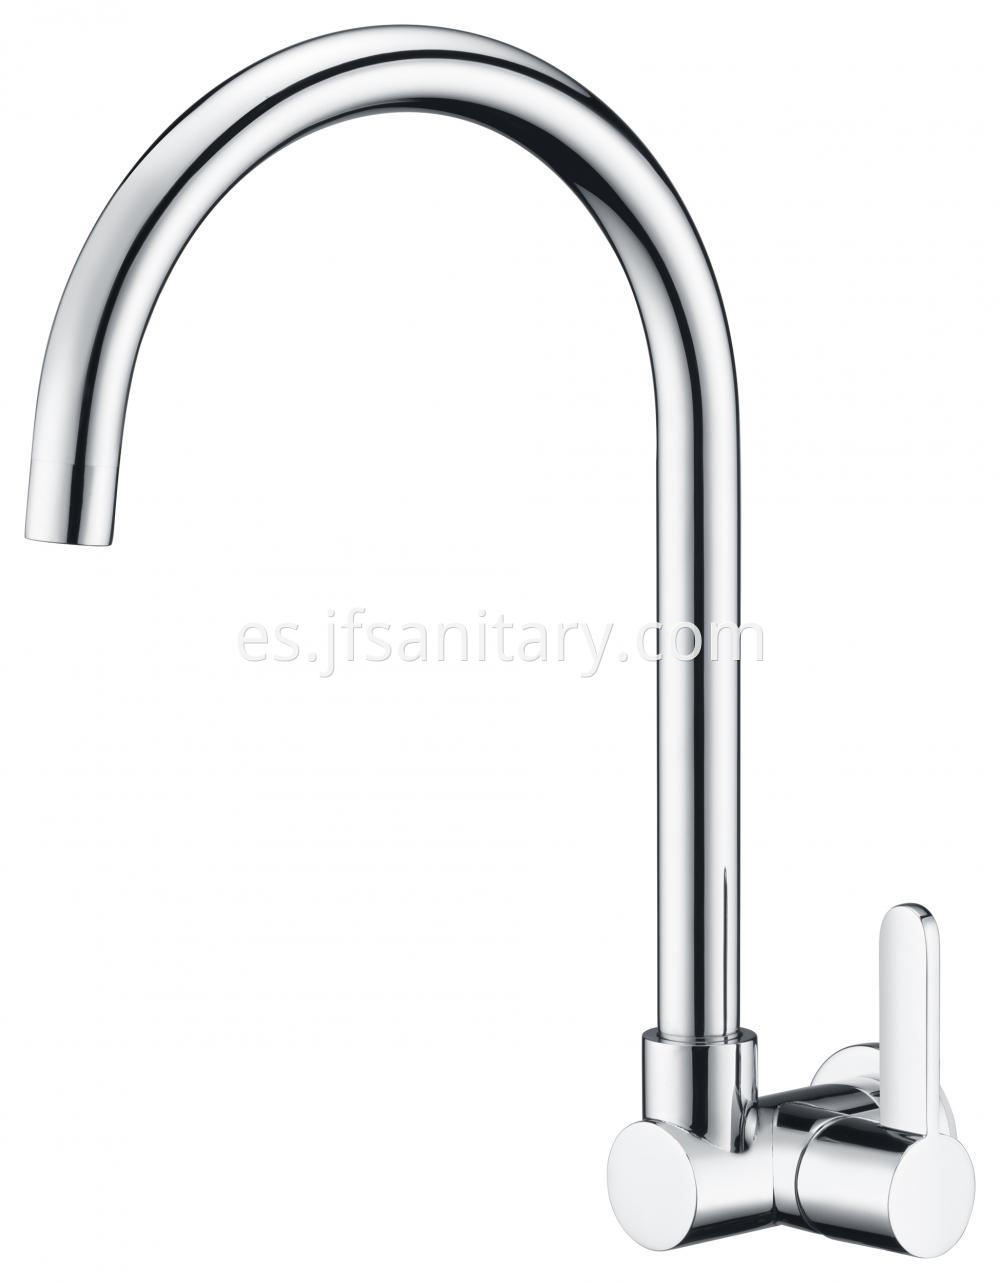 new faucet for kitchen sink